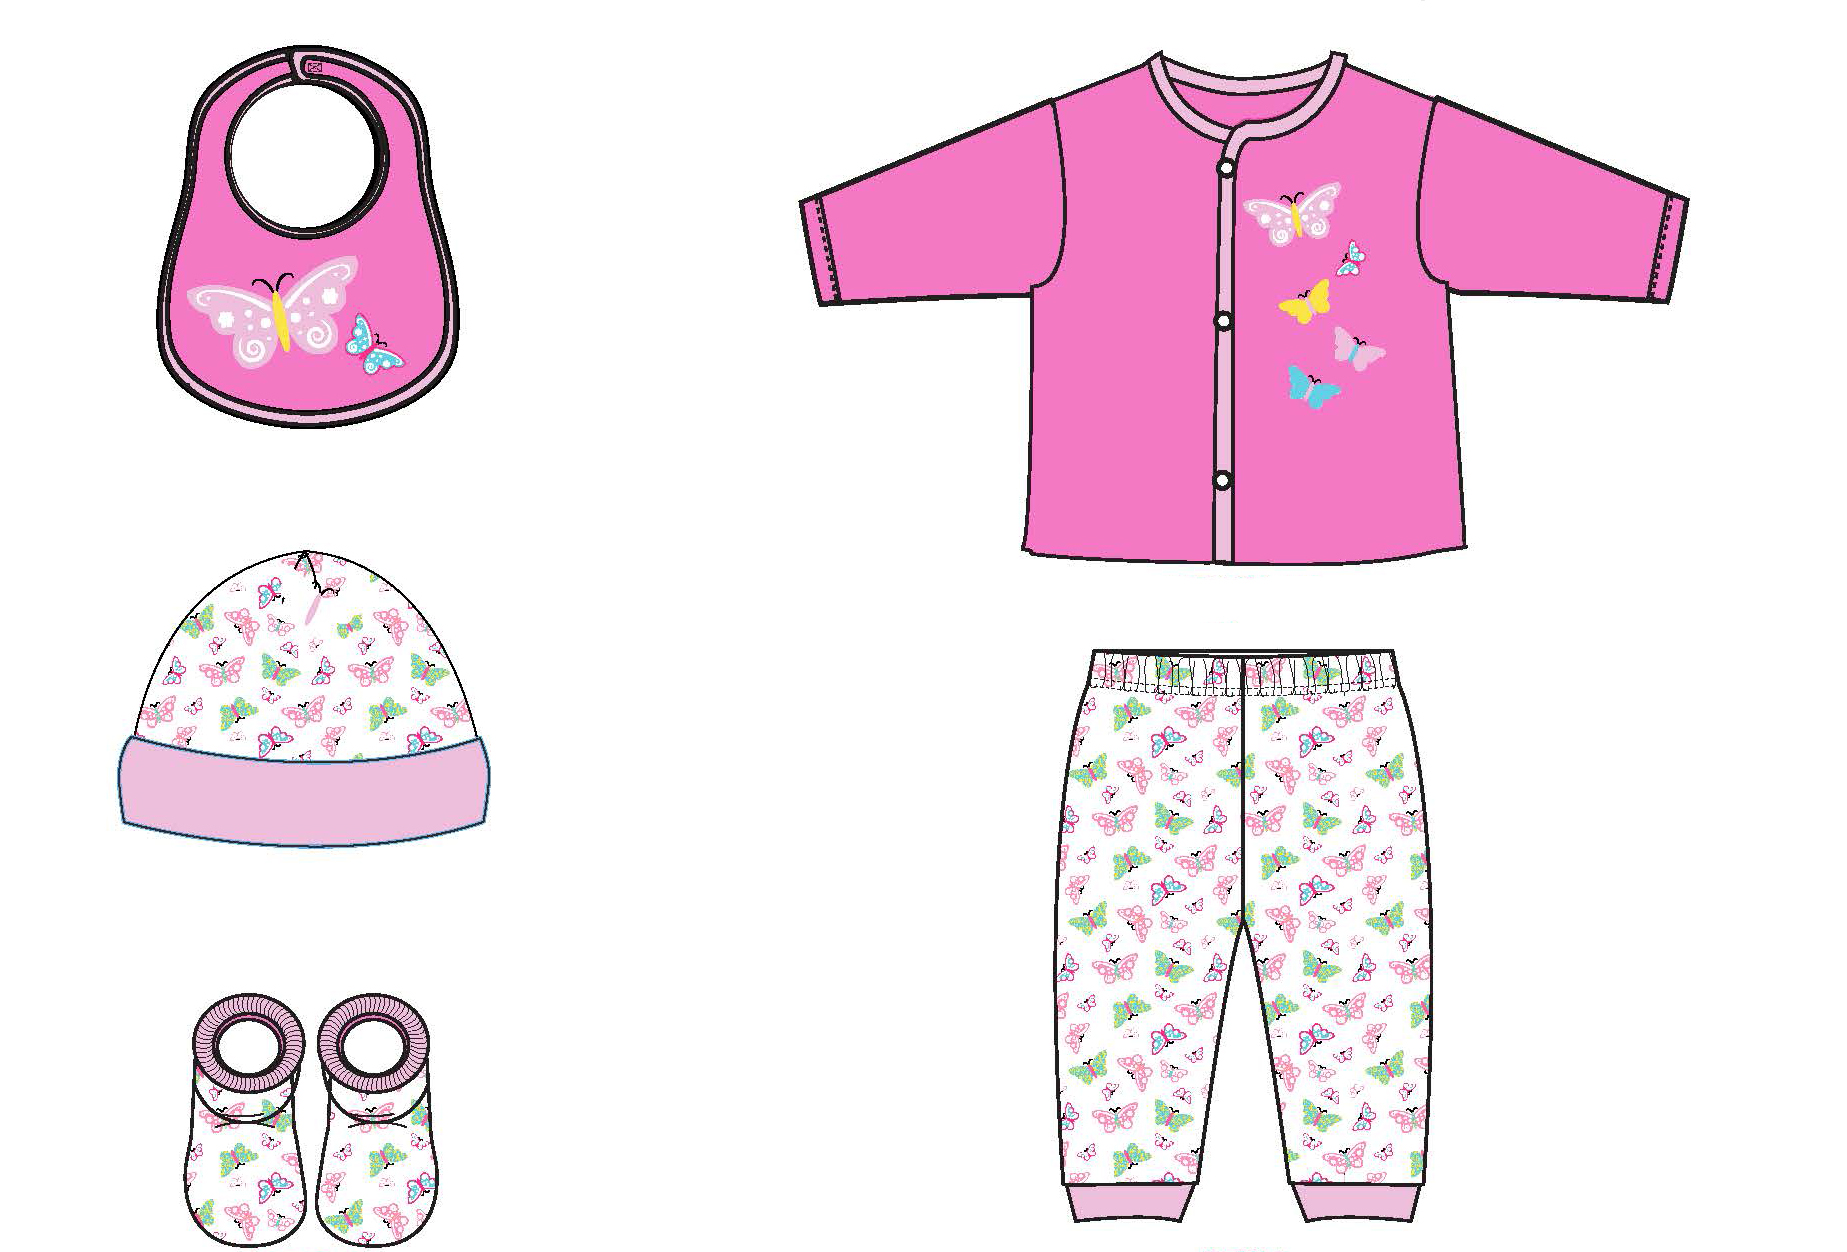 5 PC. Baby Girl's Printed Cardigan & Apparel Sets w/ Butterfly Print